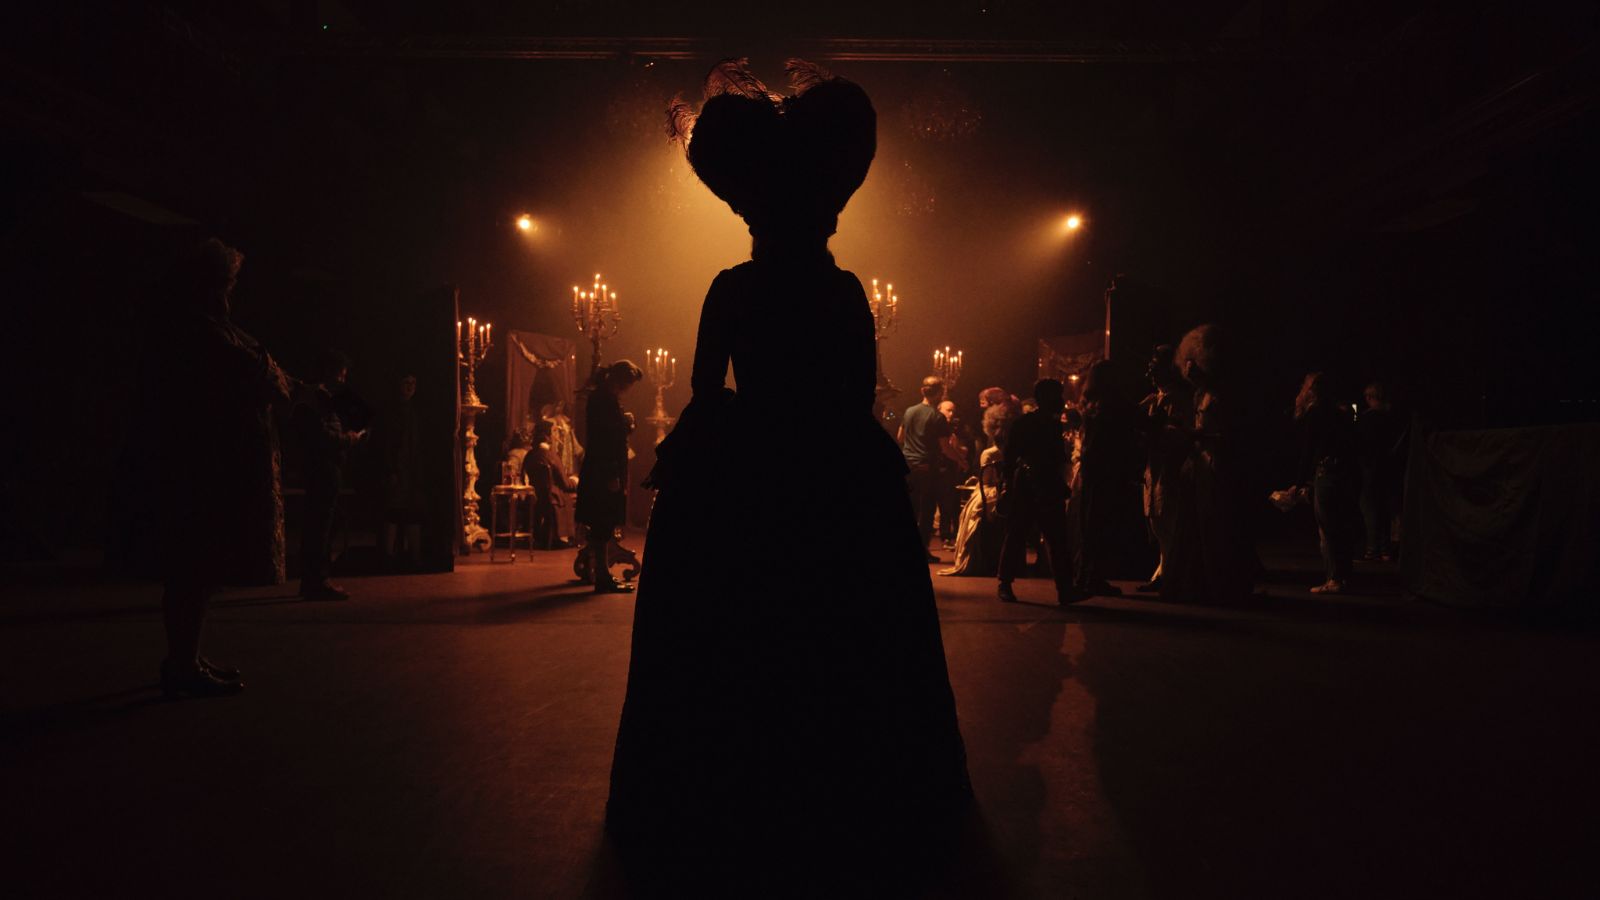 Still from Timestalker, which shows the silhouette of a woman wearing a regency gown and large wig.